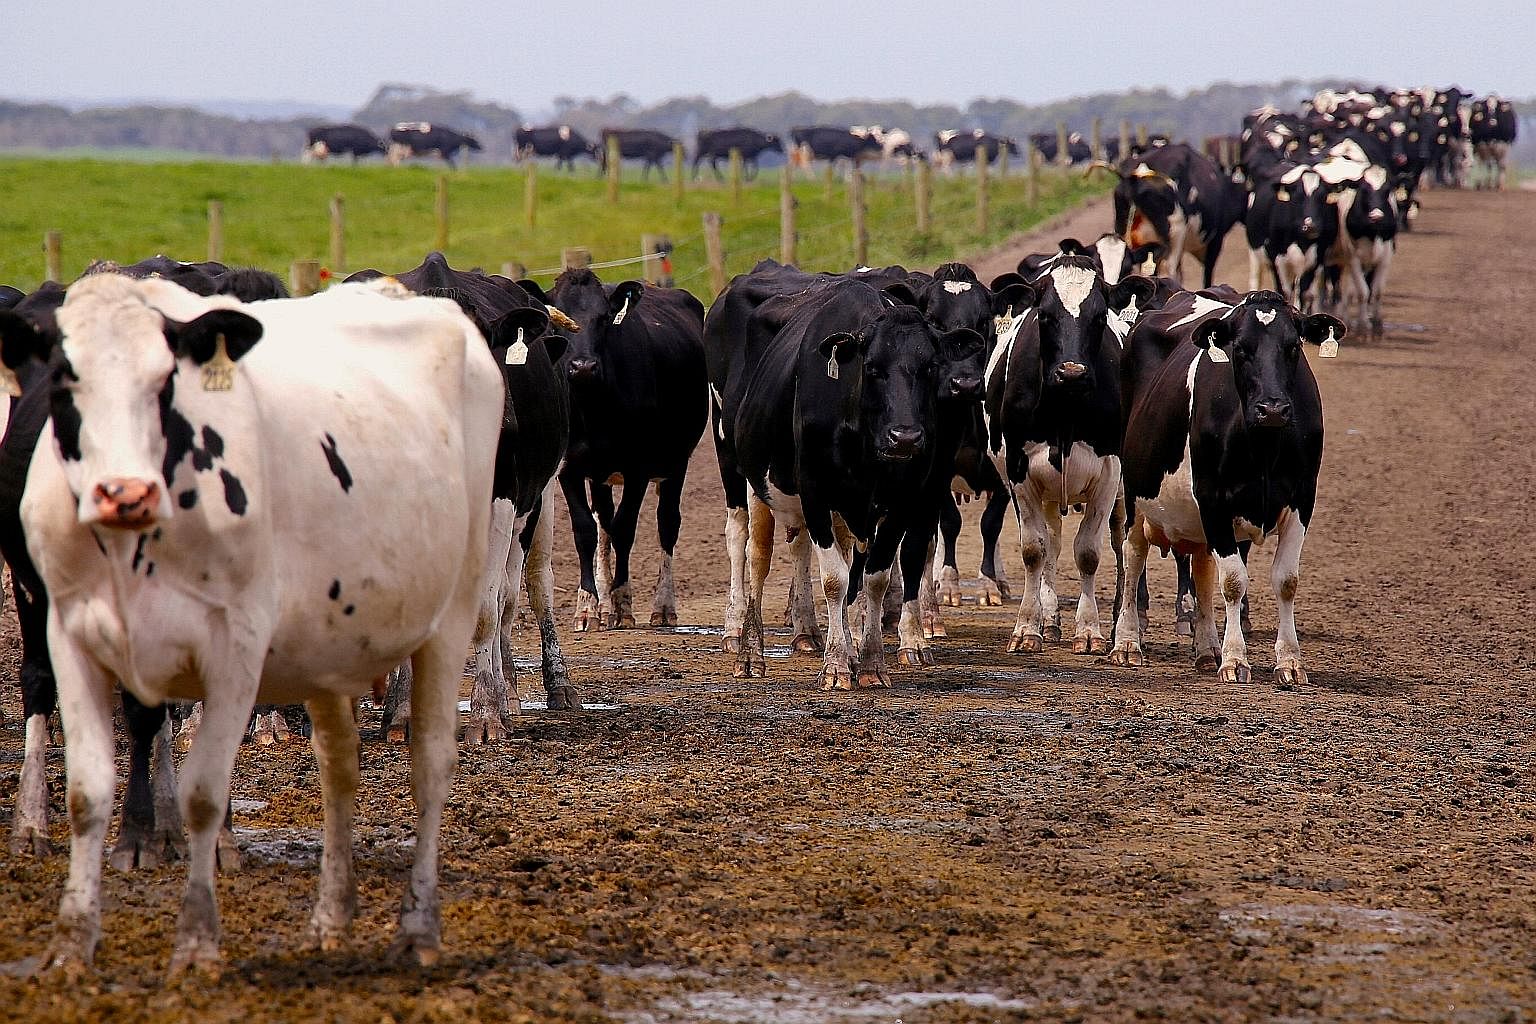 China's Moon Lake Investments paid US$200 million (S$283 million) in cash for Australia's largest dairy, which stretches over 19,000ha of pastoral land in Tasmania.